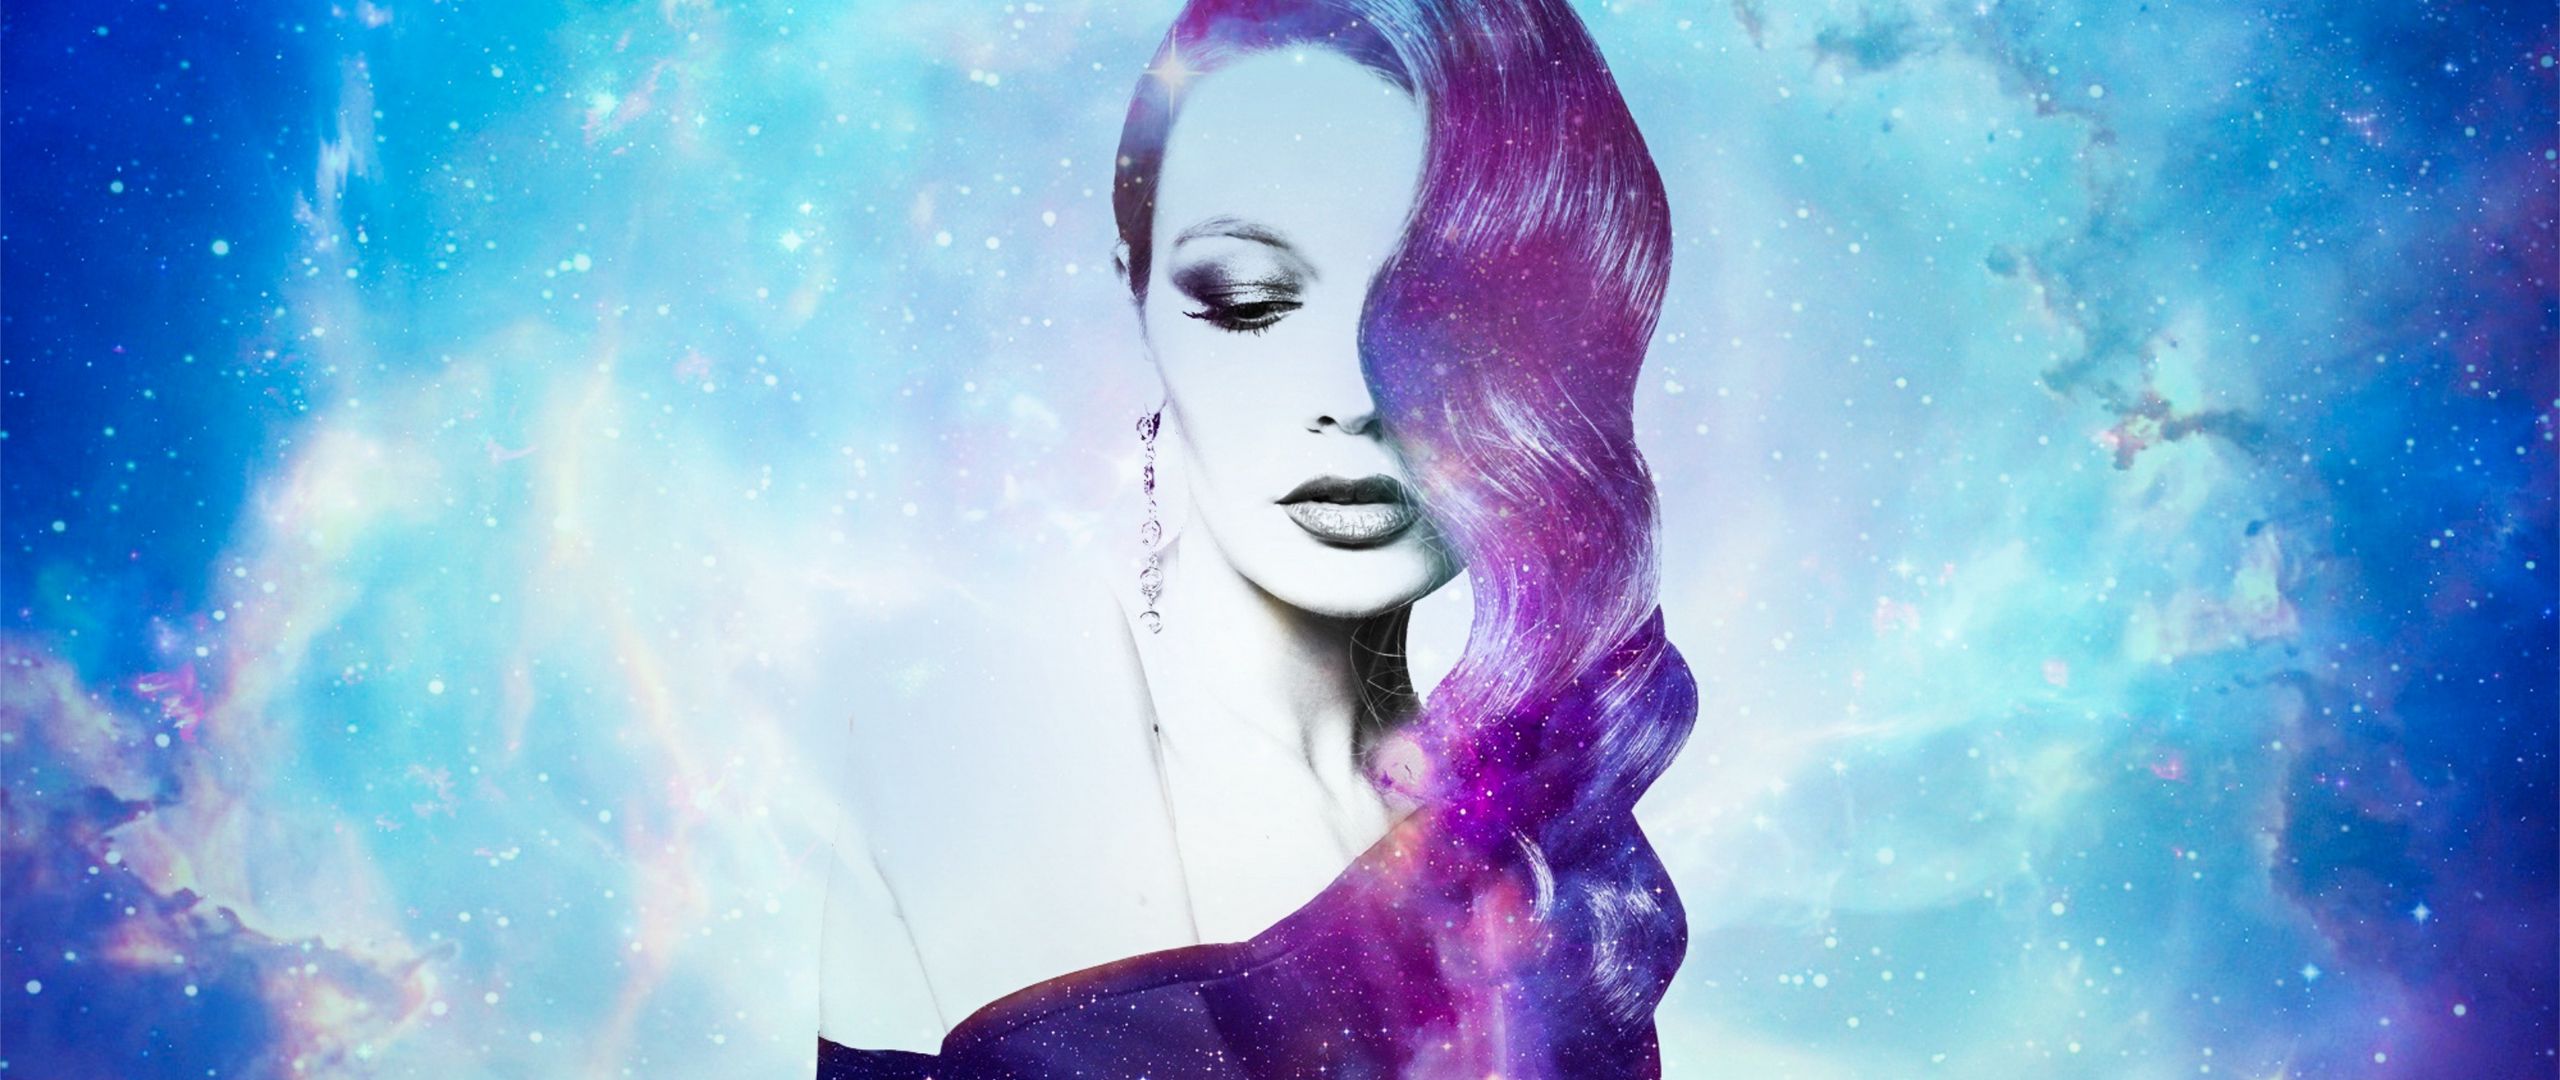 Download wallpaper 2560x1080 girl, space, photomanipulation, galaxy dual  wide 1080p hd background